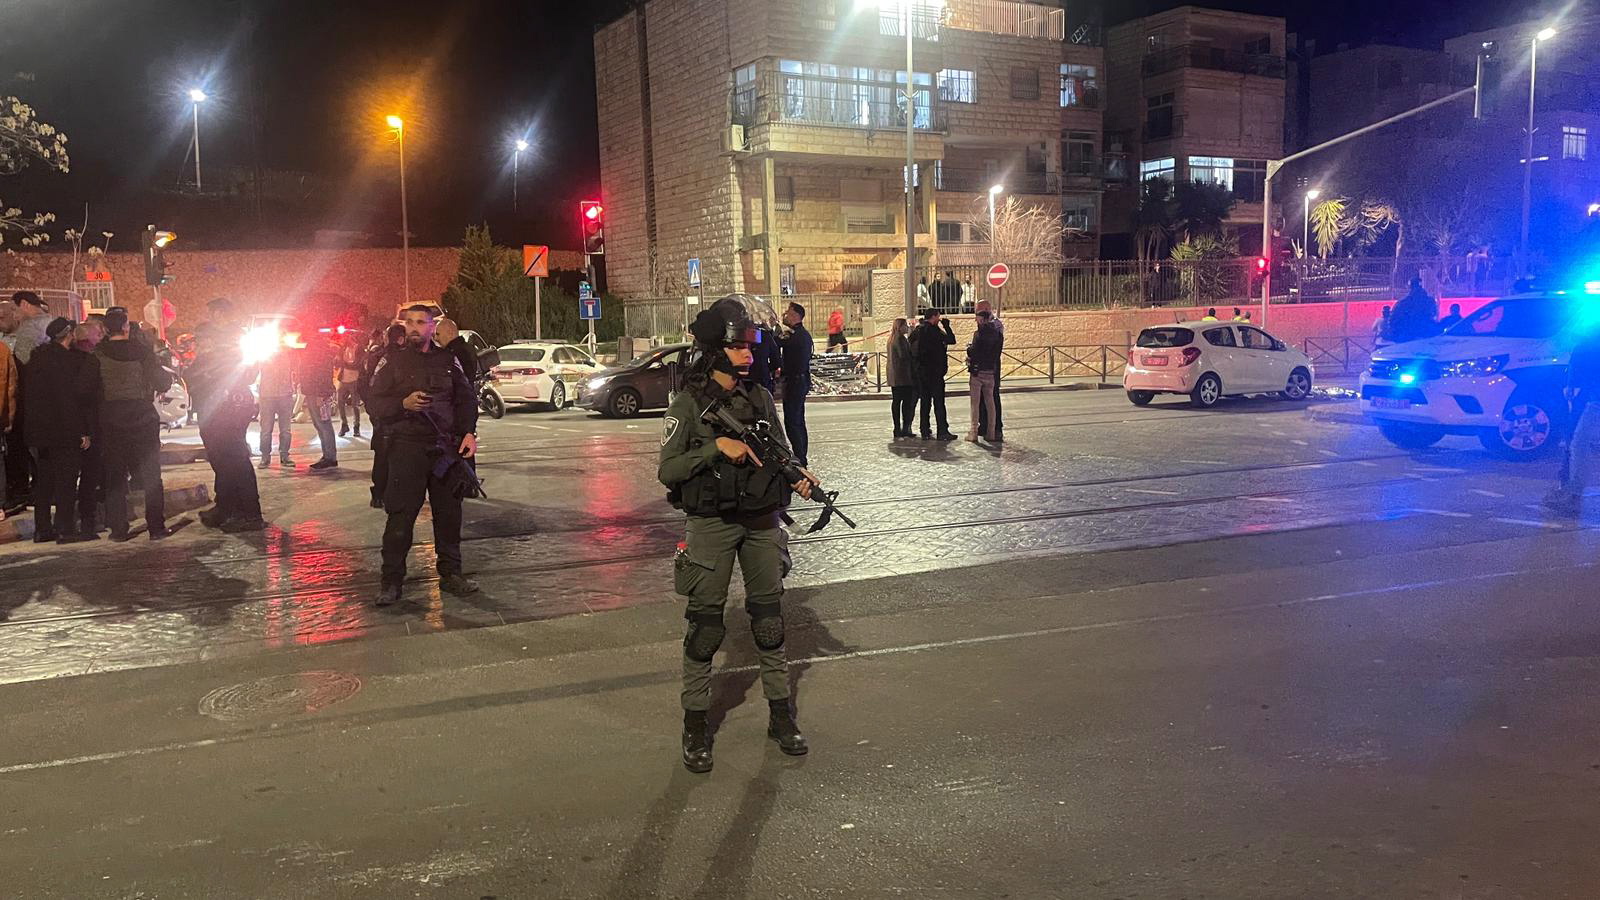 epa10434657 Emergency services work at the scene of a shooting at a synagogue in Neve Yaakov area of Jerusalem, Israel, 27 January 2023. According to a police spokesperson, at least eight people were killed and several injured in a shooting attack at a synagogue.  EPA/ATEF SAFADI